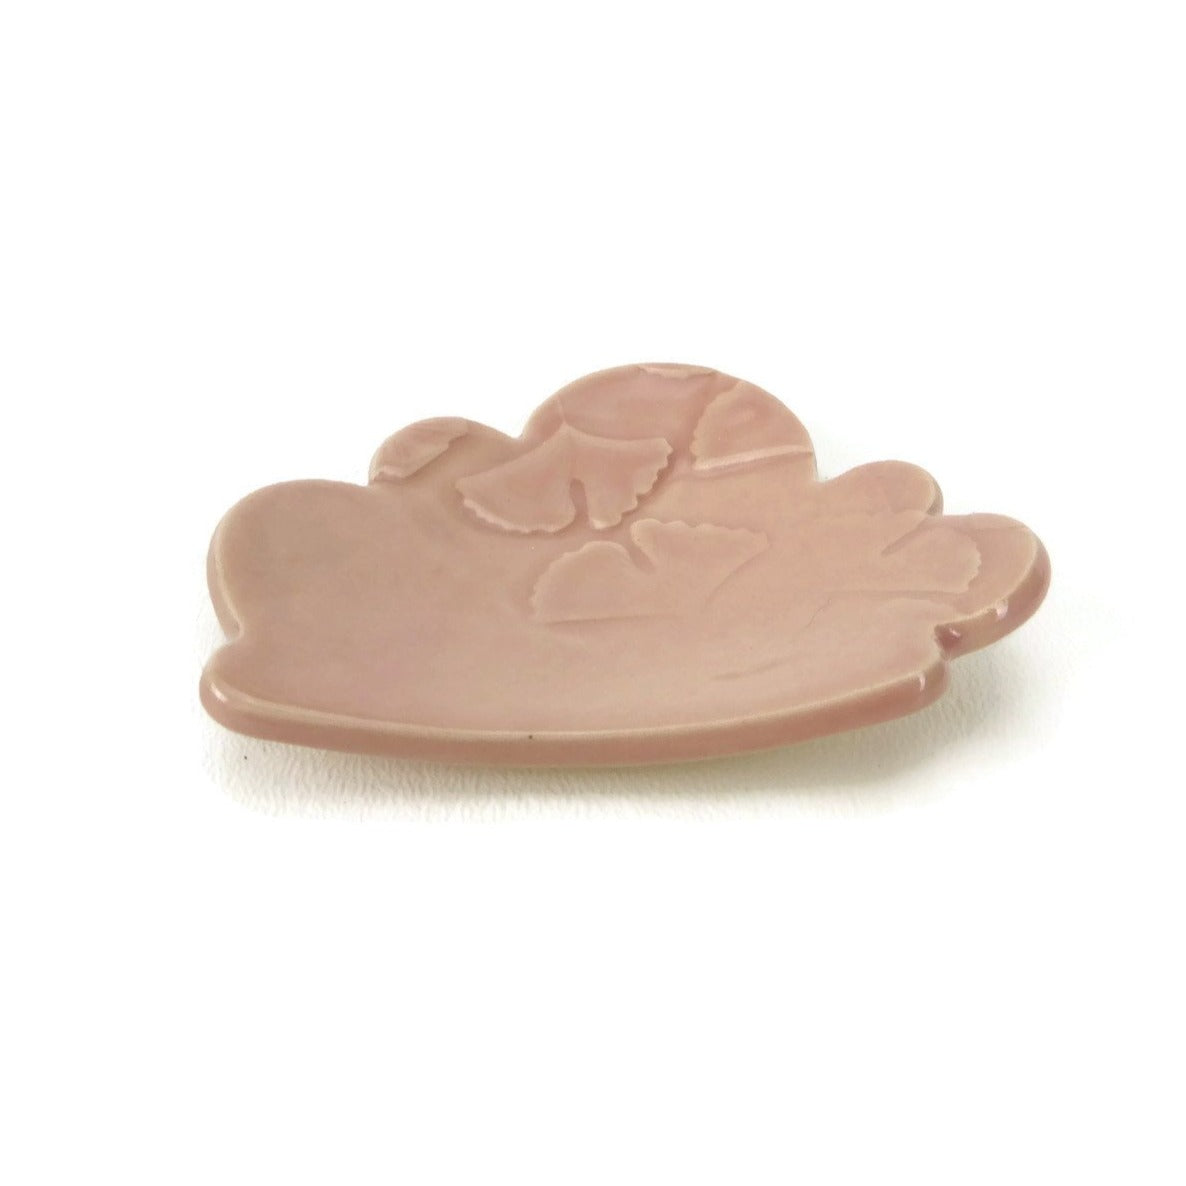 Cherry Blossom Cloud Shaped Trivet with Ginkgo Patterning